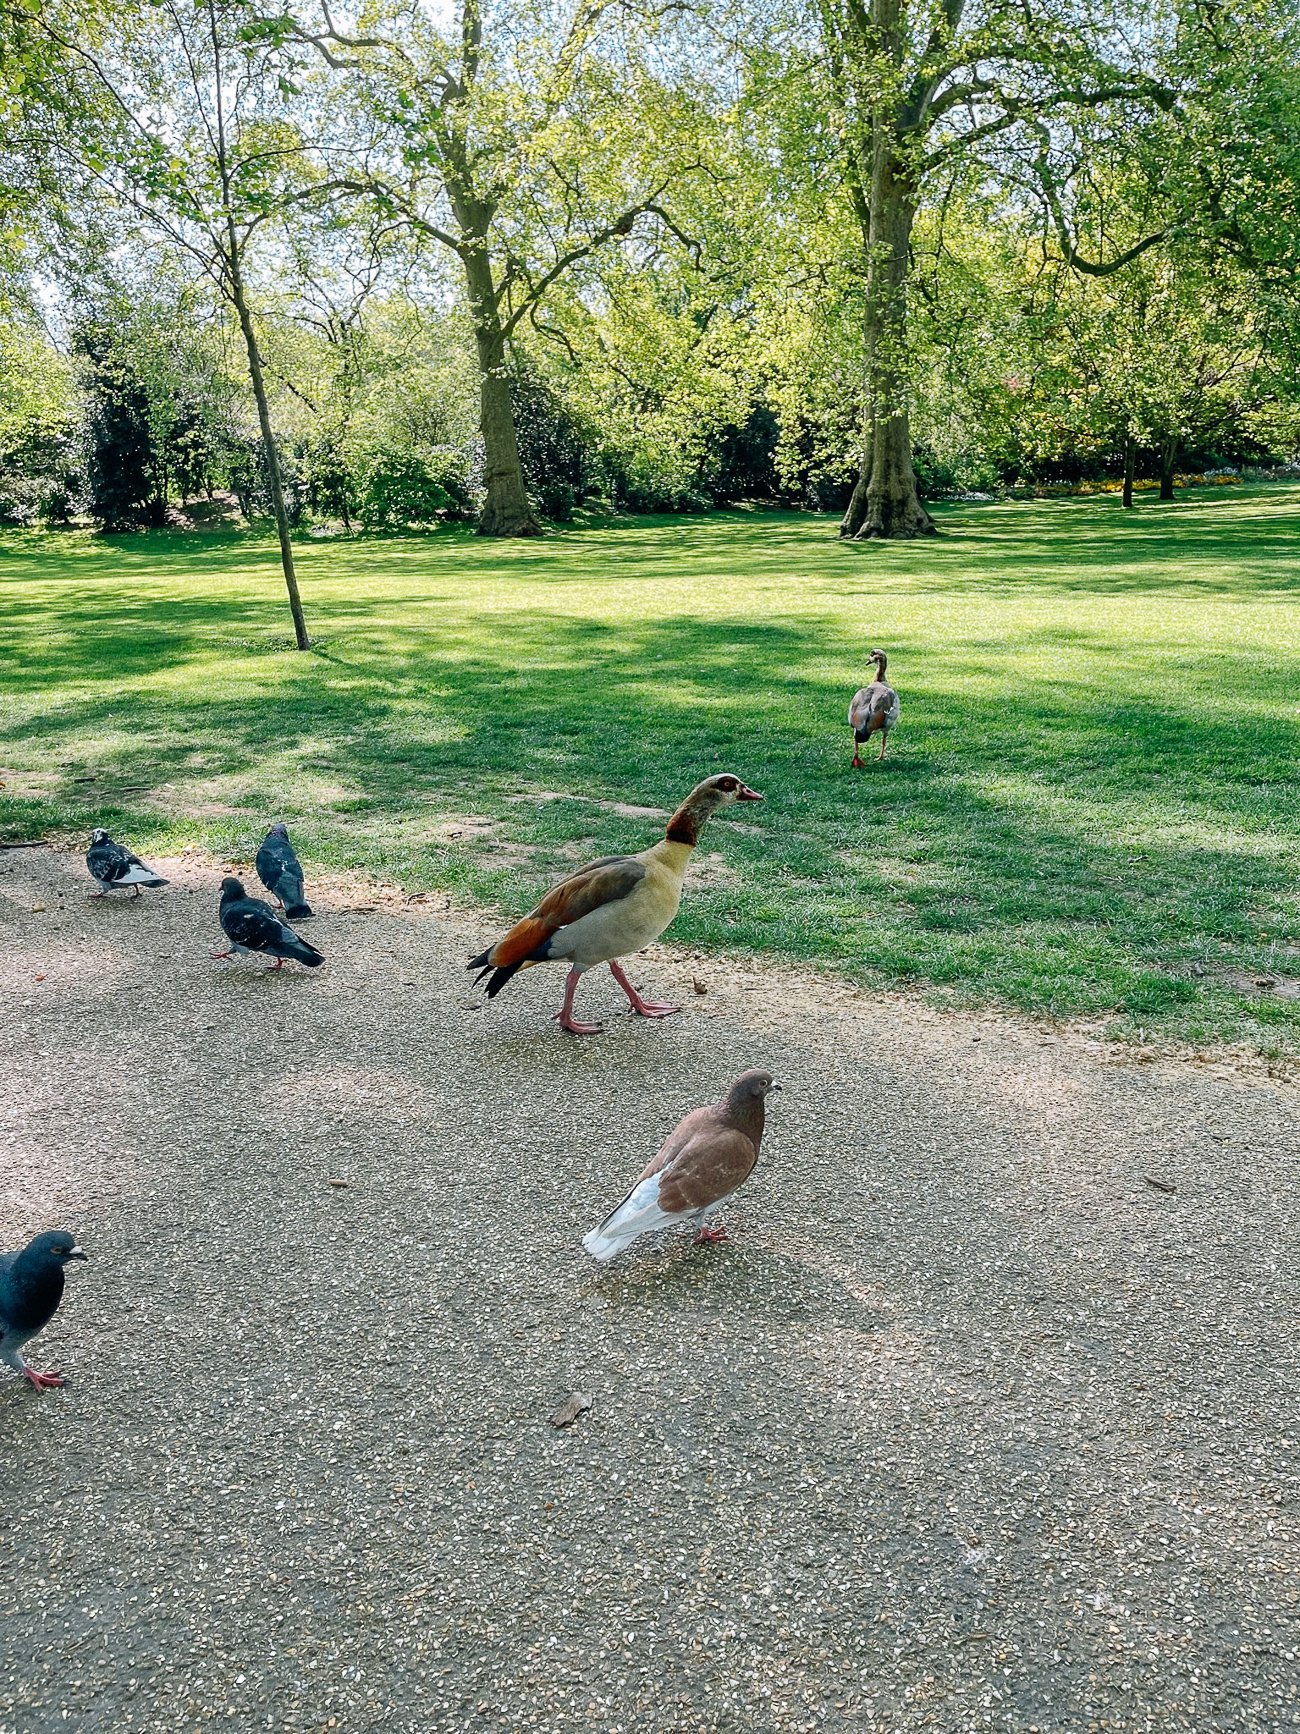 Ducks and pigeons in St. James park